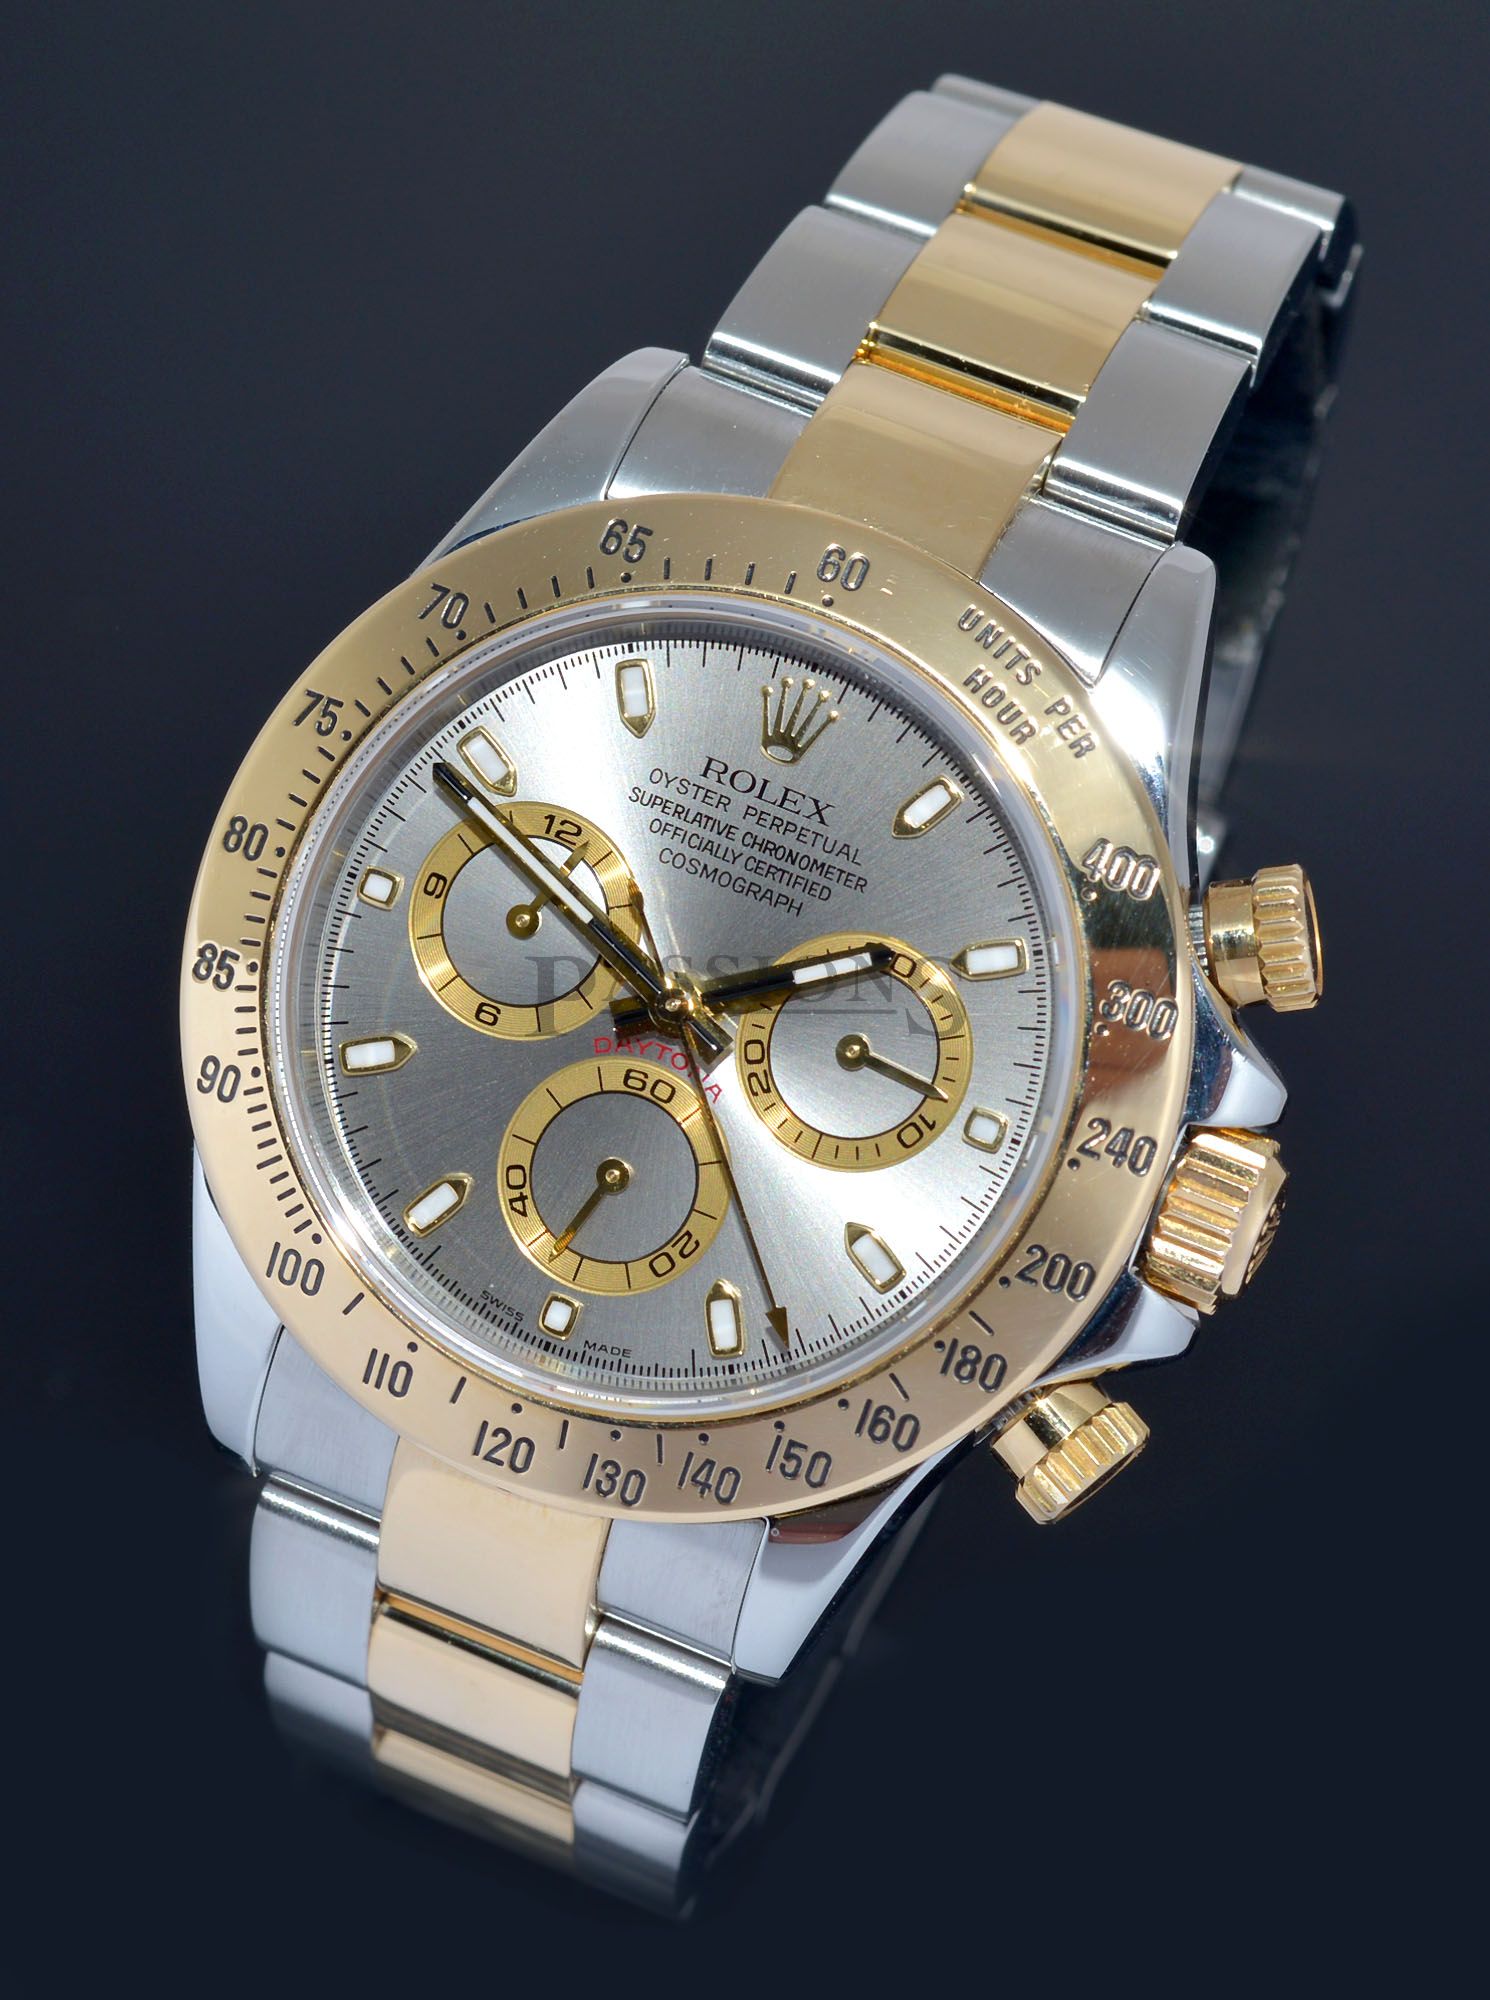 Rolex 39mm Oyster Perpetual Cosmograph Daytona Chronometer Ref 116523 In 18kyg Steel Passions Watch Exchange Singapore S Premier Pre Owned Watch Dealer